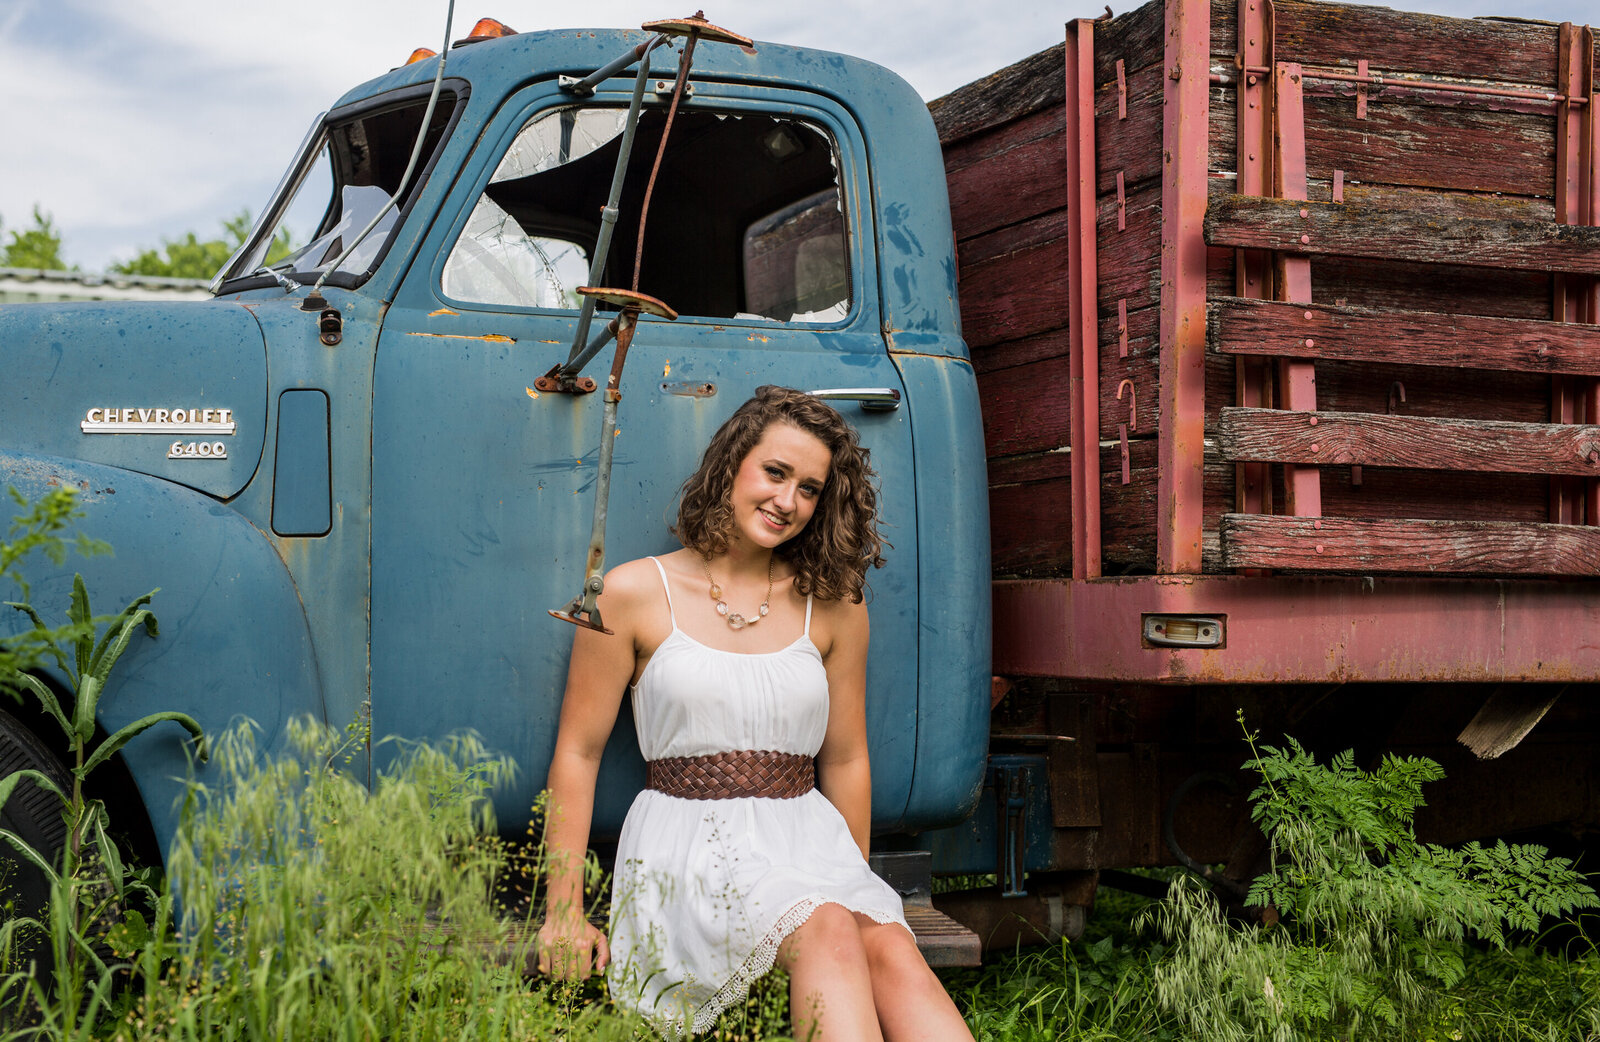 Payten poses by an old blue truck